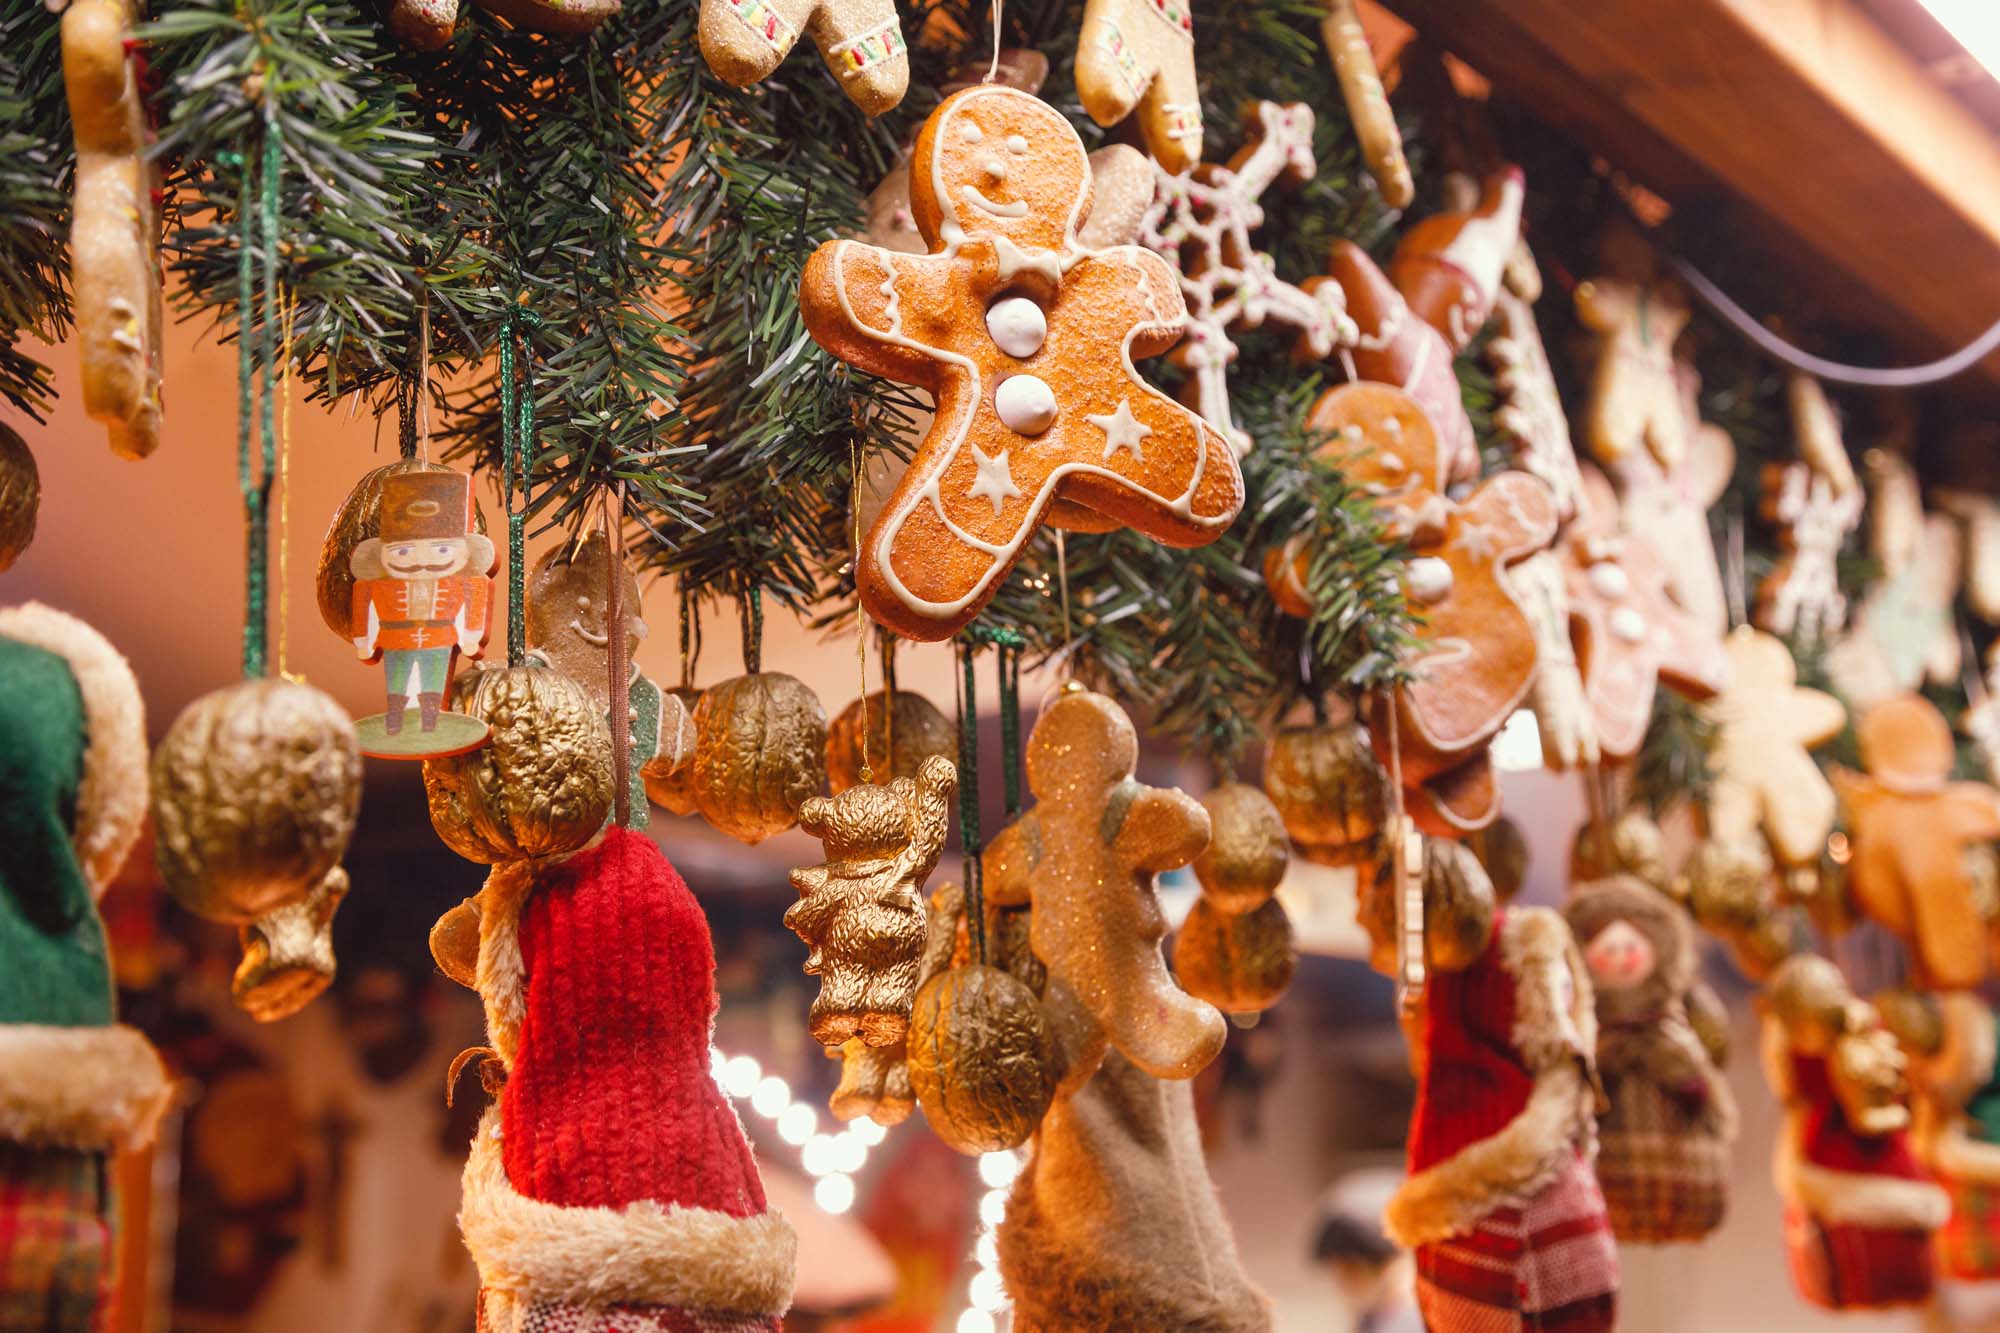 Christmas decorations at Christmas market stall in Berlin German